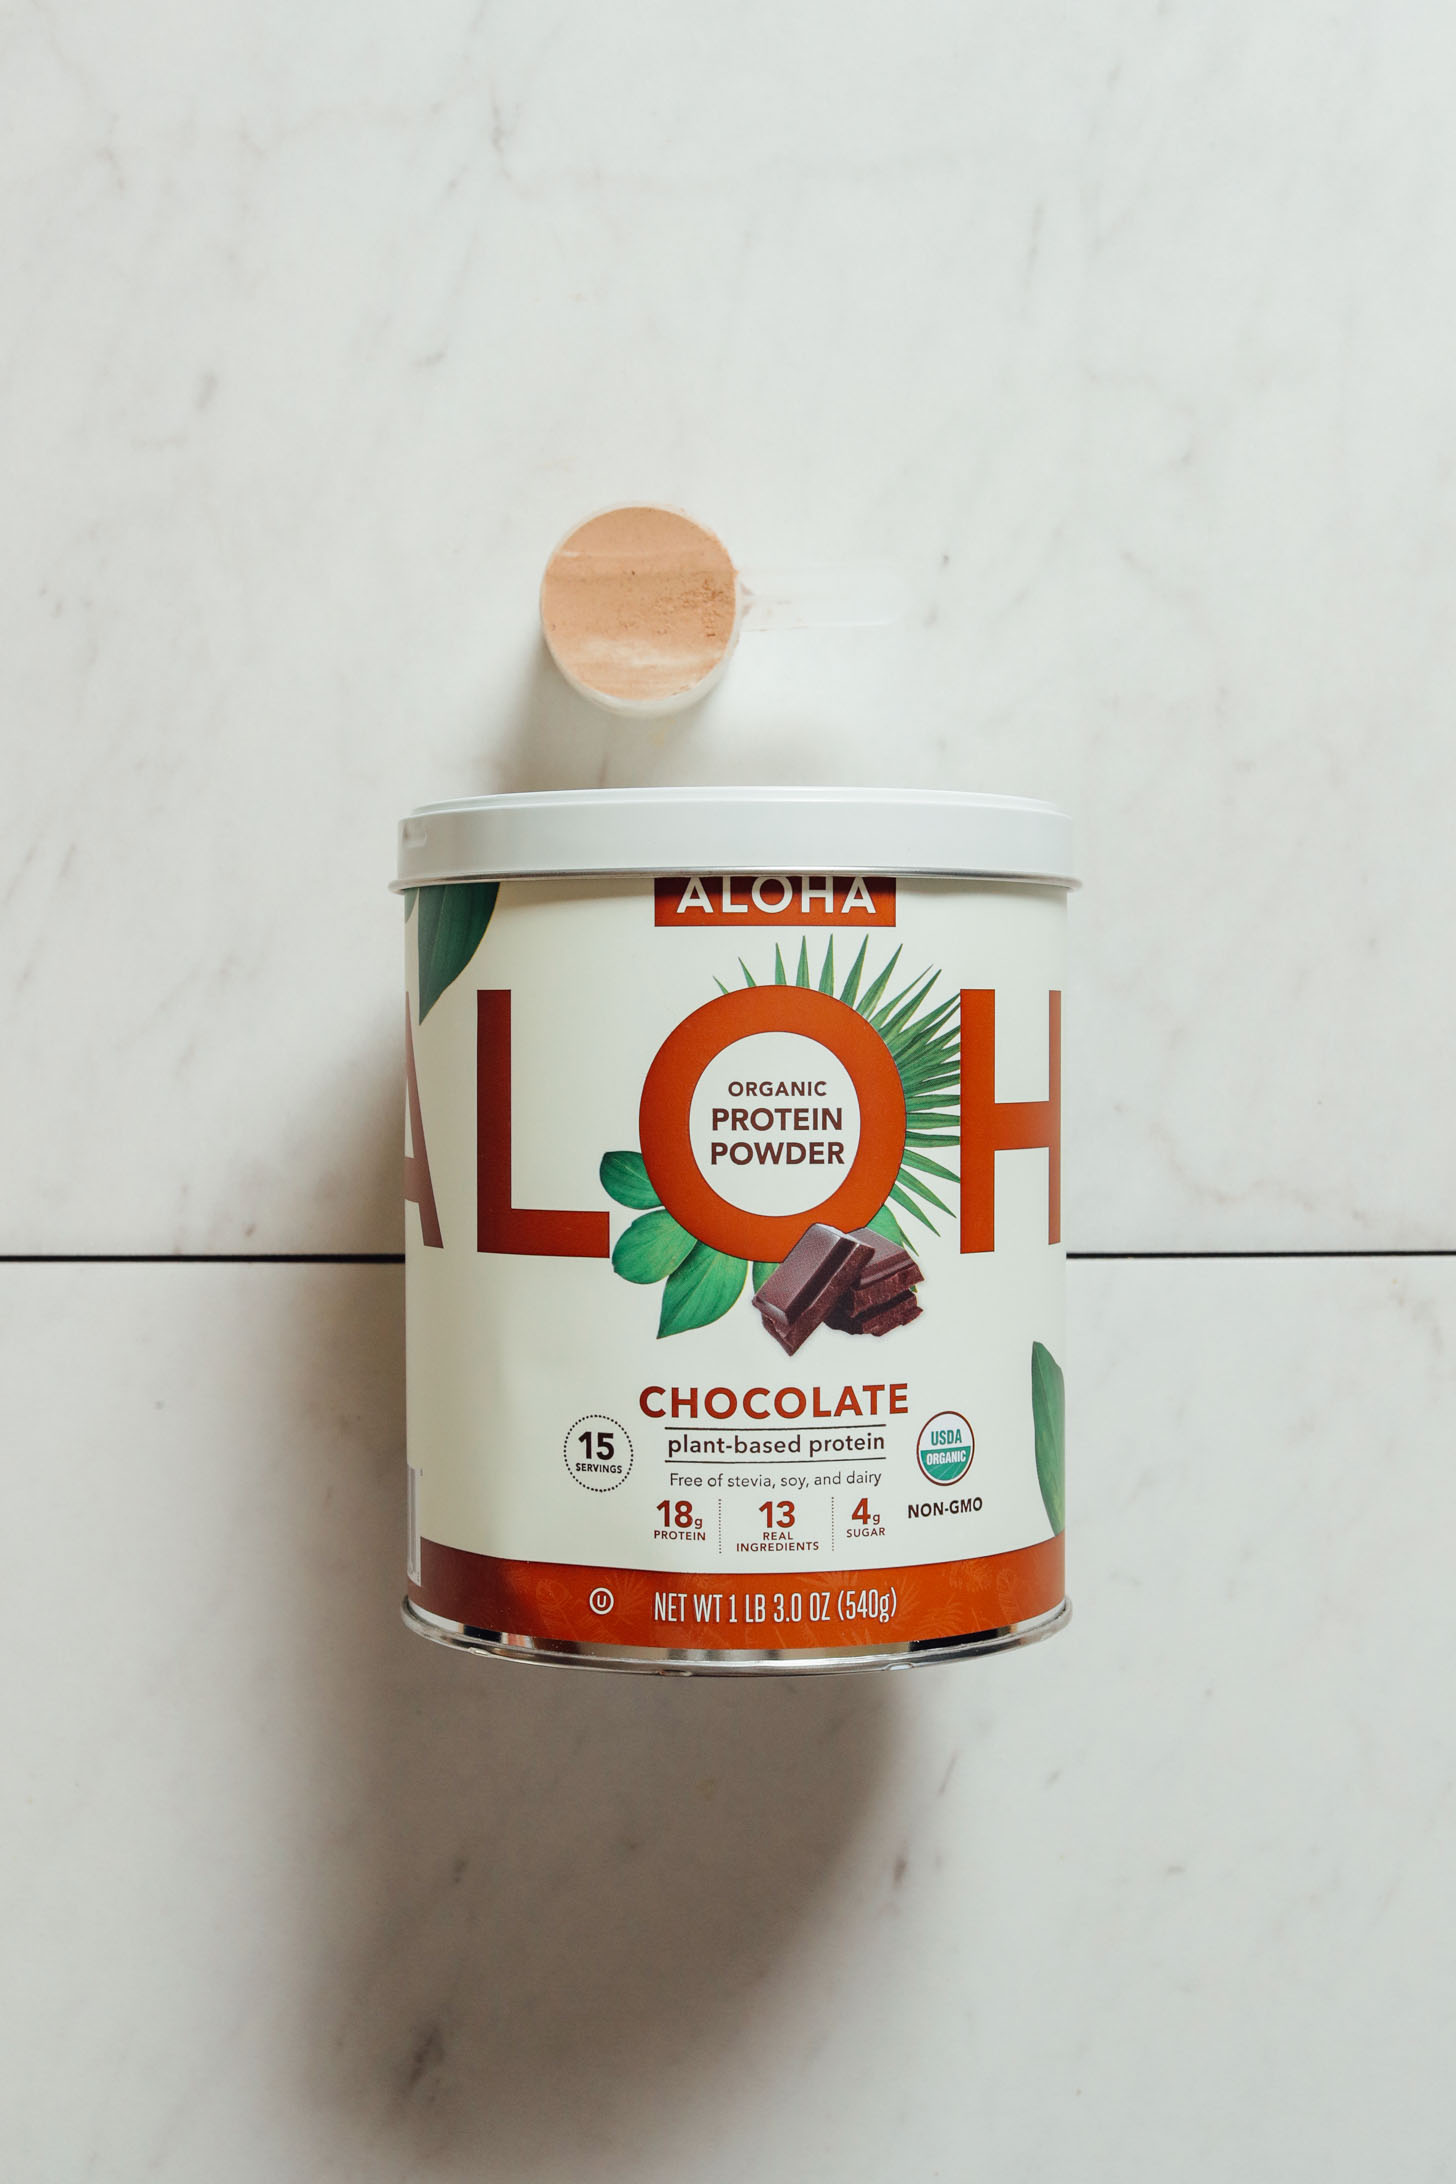 Tub of Aloha Chocolate Protein for our plant-based protein review winner